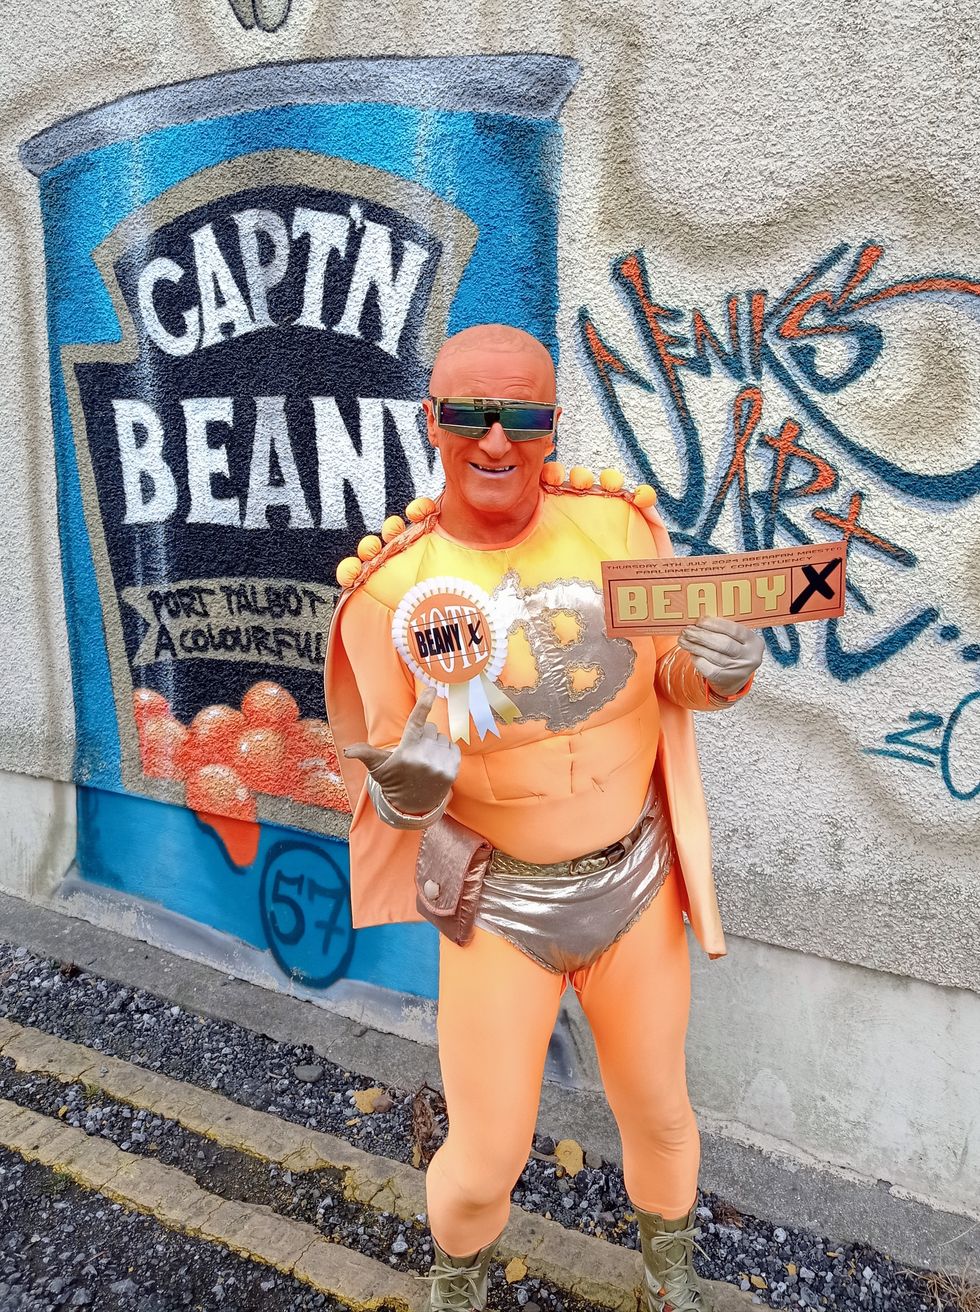 Captain Beany says no to half-baked manifestos in latest bid for Parliament